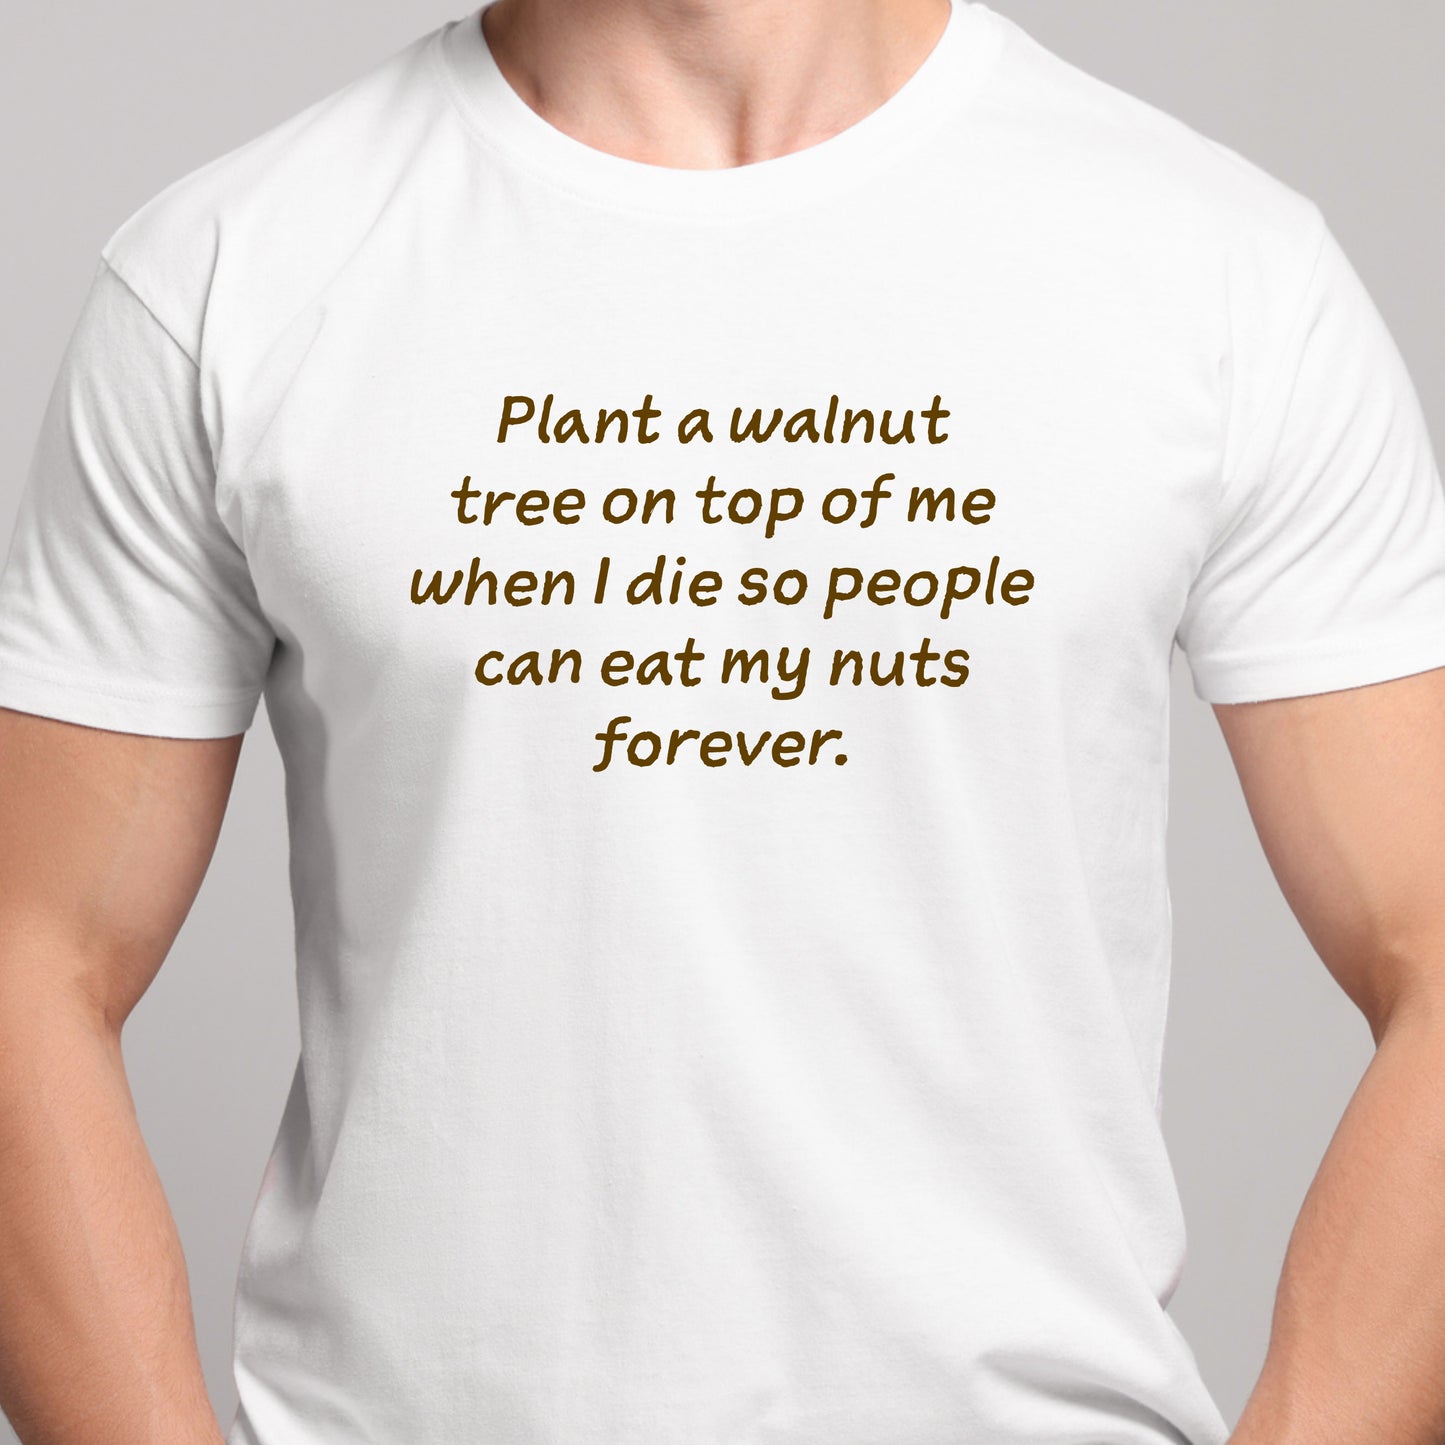 Sarcastic T-Shirt For Eat My Nuts TShirt For Walnut Tree T Shirt For Innuendo Shirt For Funny Man Shirt For Gift For Him